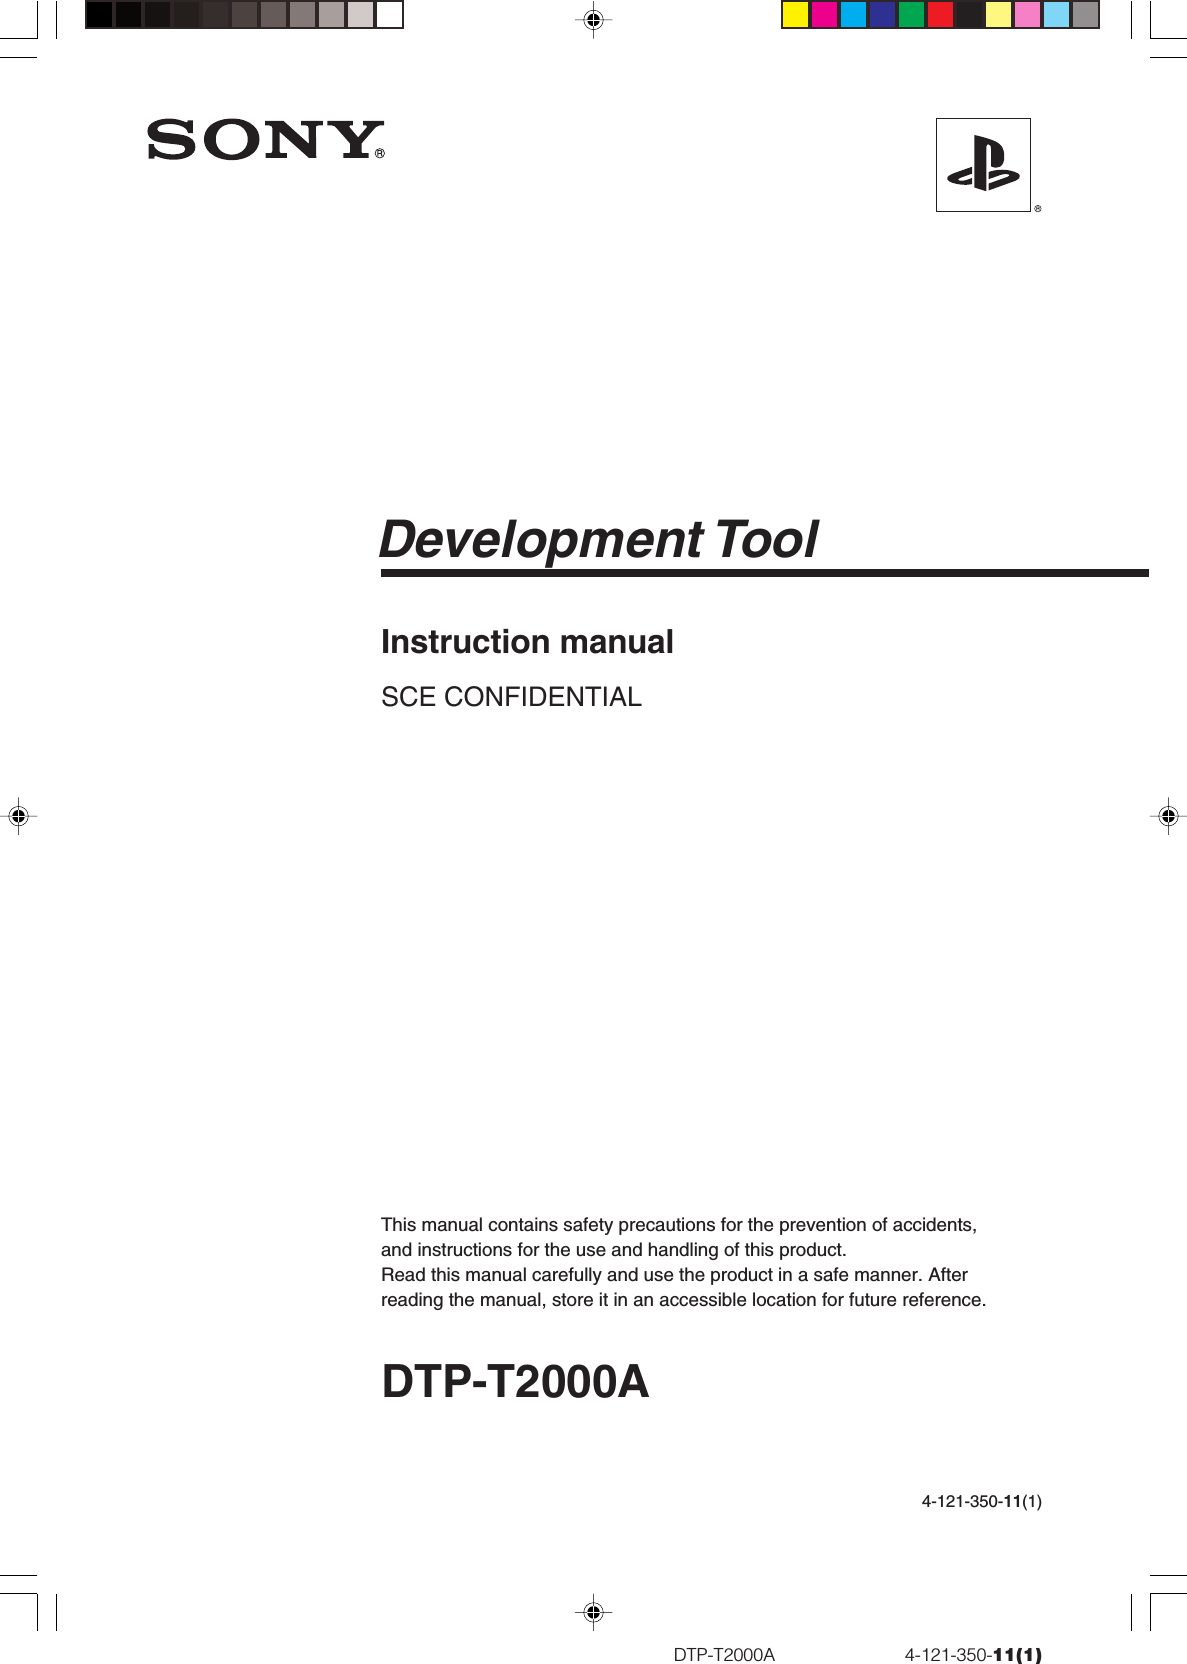 DTP-T2000A                          4-121-350-11(1)Instruction manualSCE CONFIDENTIALDTP-T2000ADevelopment ToolThis manual contains safety precautions for the prevention of accidents,and instructions for the use and handling of this product.Read this manual carefully and use the product in a safe manner. Afterreading the manual, store it in an accessible location for future reference.4-121-350-11(1)